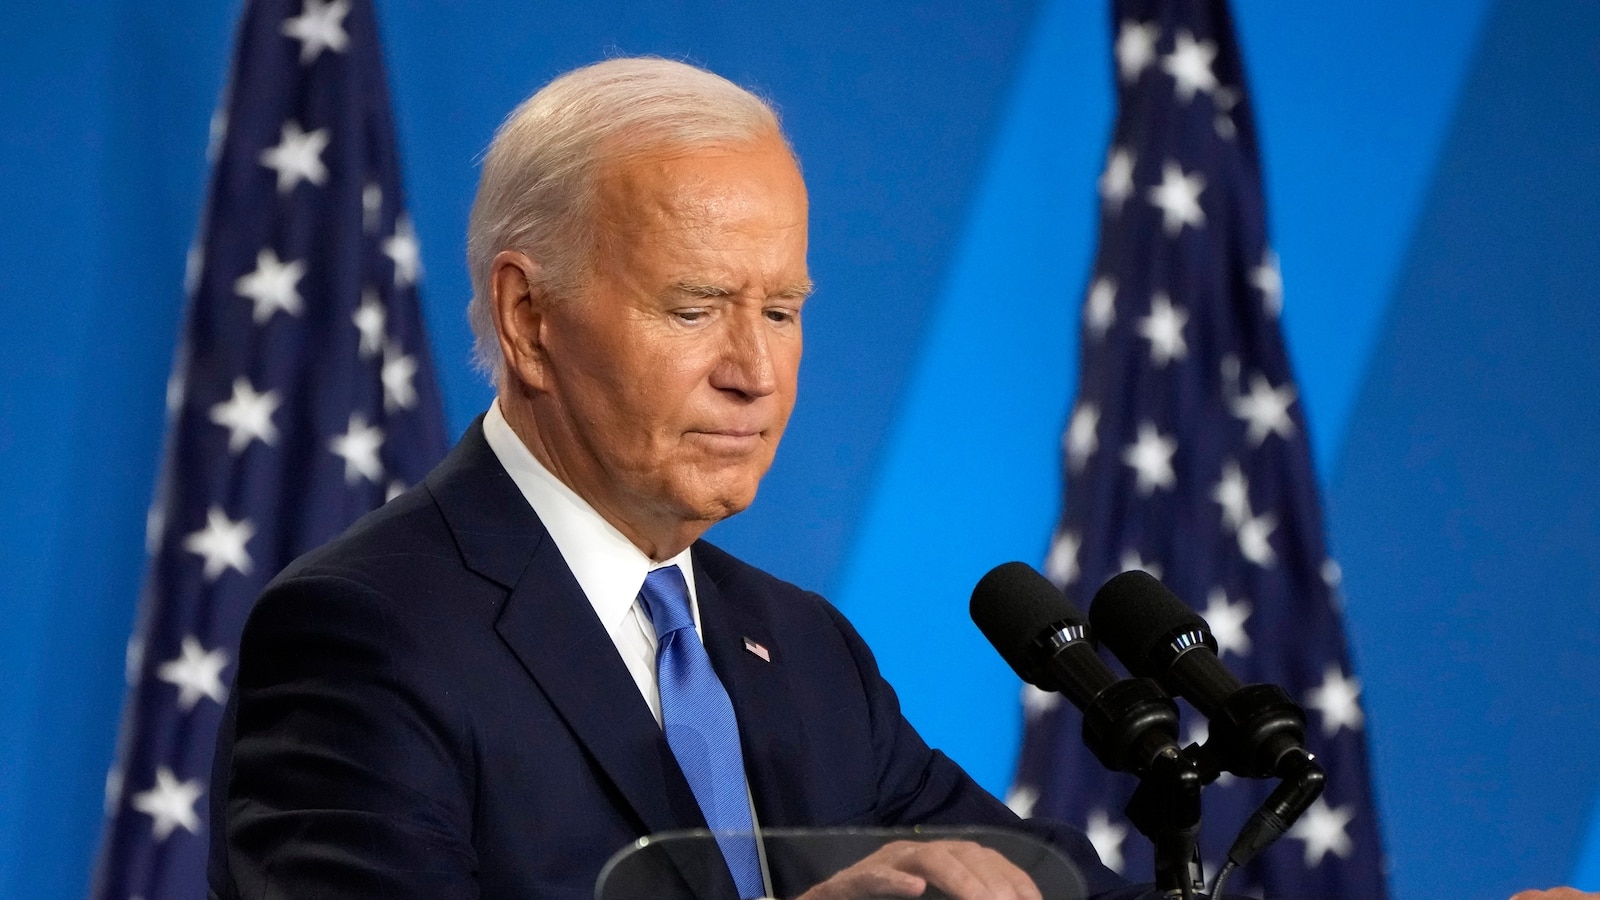 What pushed President Biden to withdraw from the reelection race?